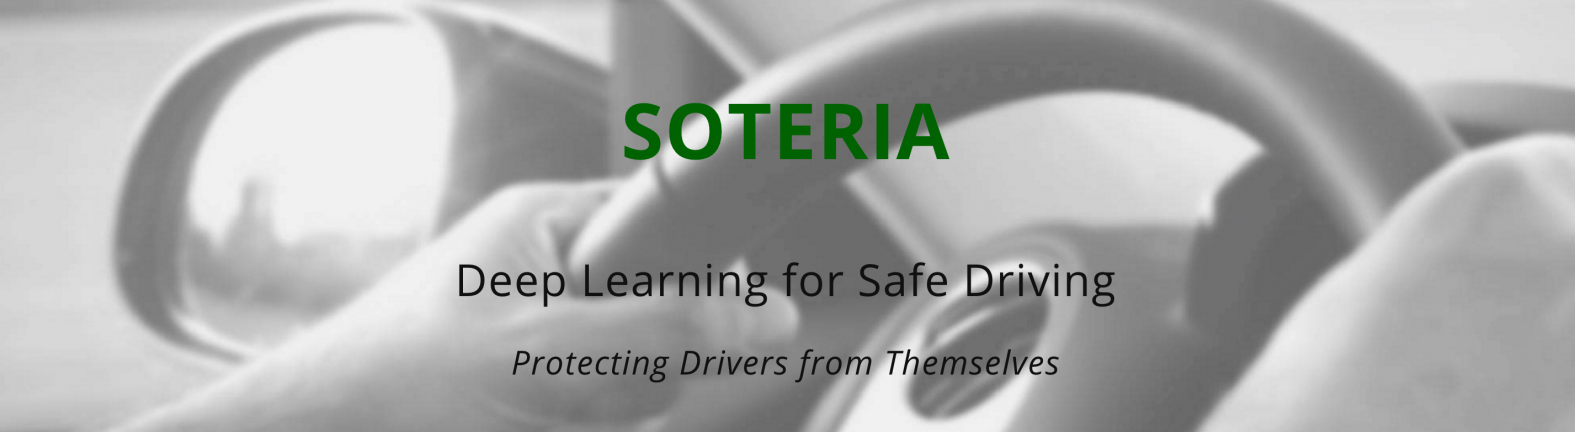 soteria_distracted_driver_detection.png